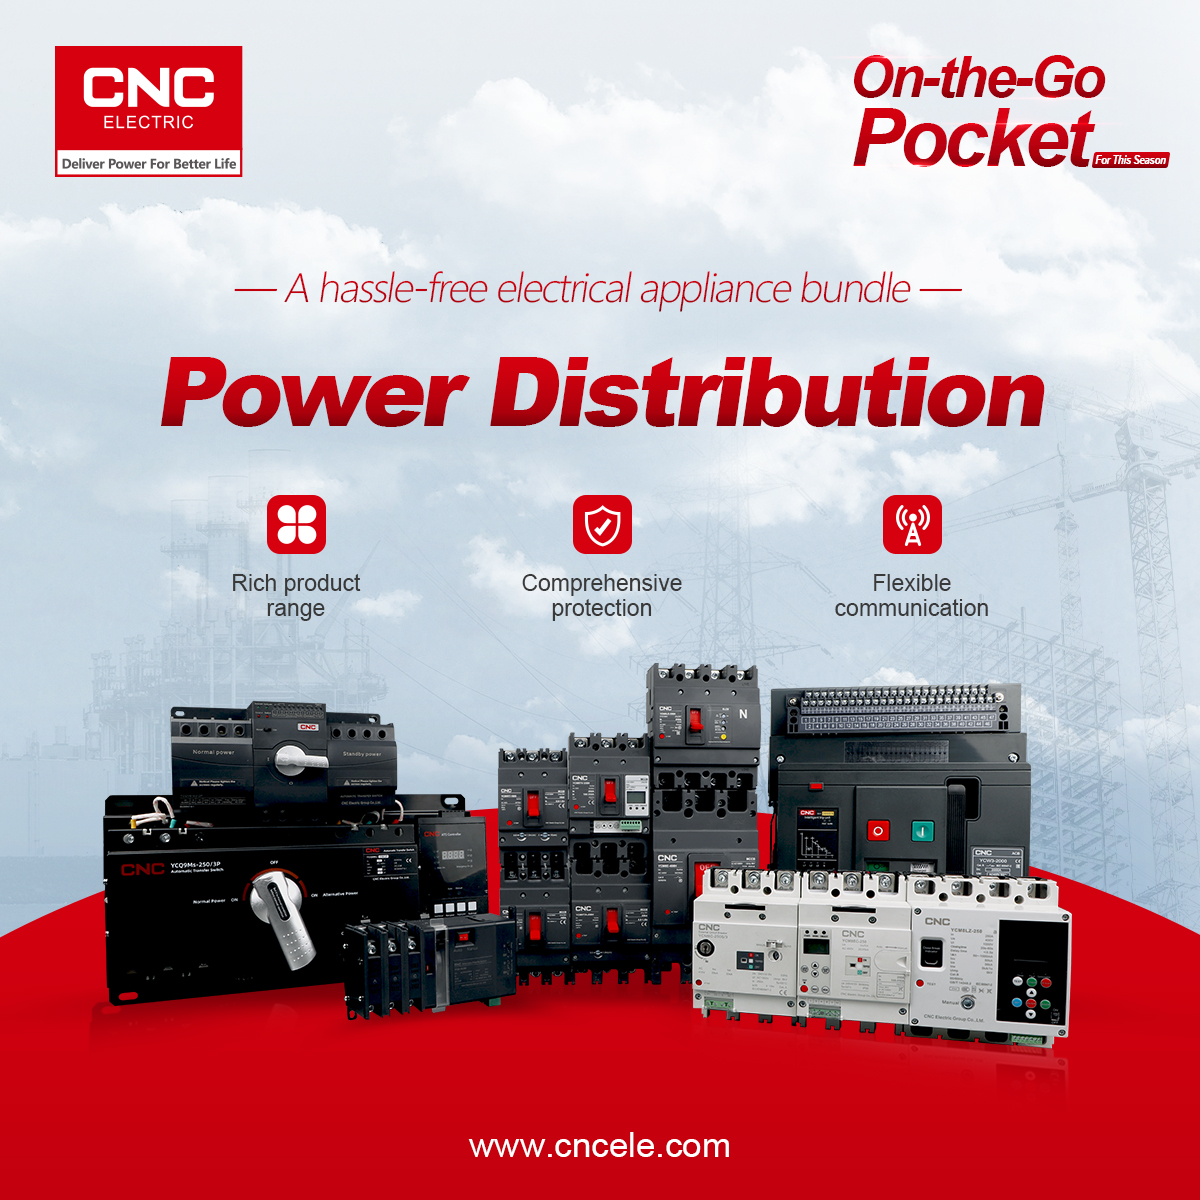 CNC | On-the-Go Pocket Launches the Second Series of Bestselling and Practical Power Distribution